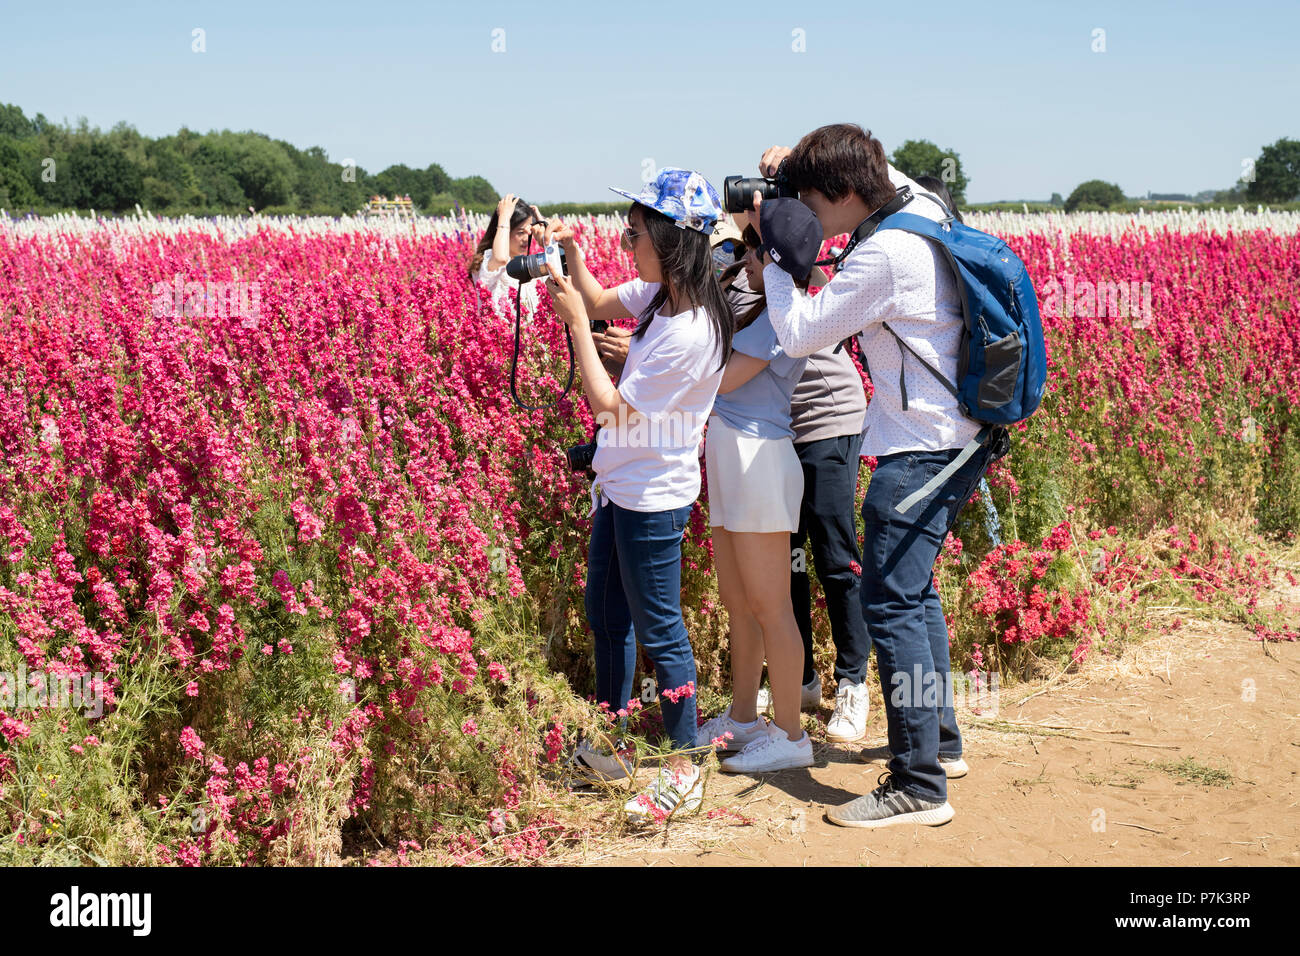 Asain tourists taking photographs amongst the Delphiniums at the Real Flower Petal Confetti company flower fields in Wick, Pershore, UK Stock Photo